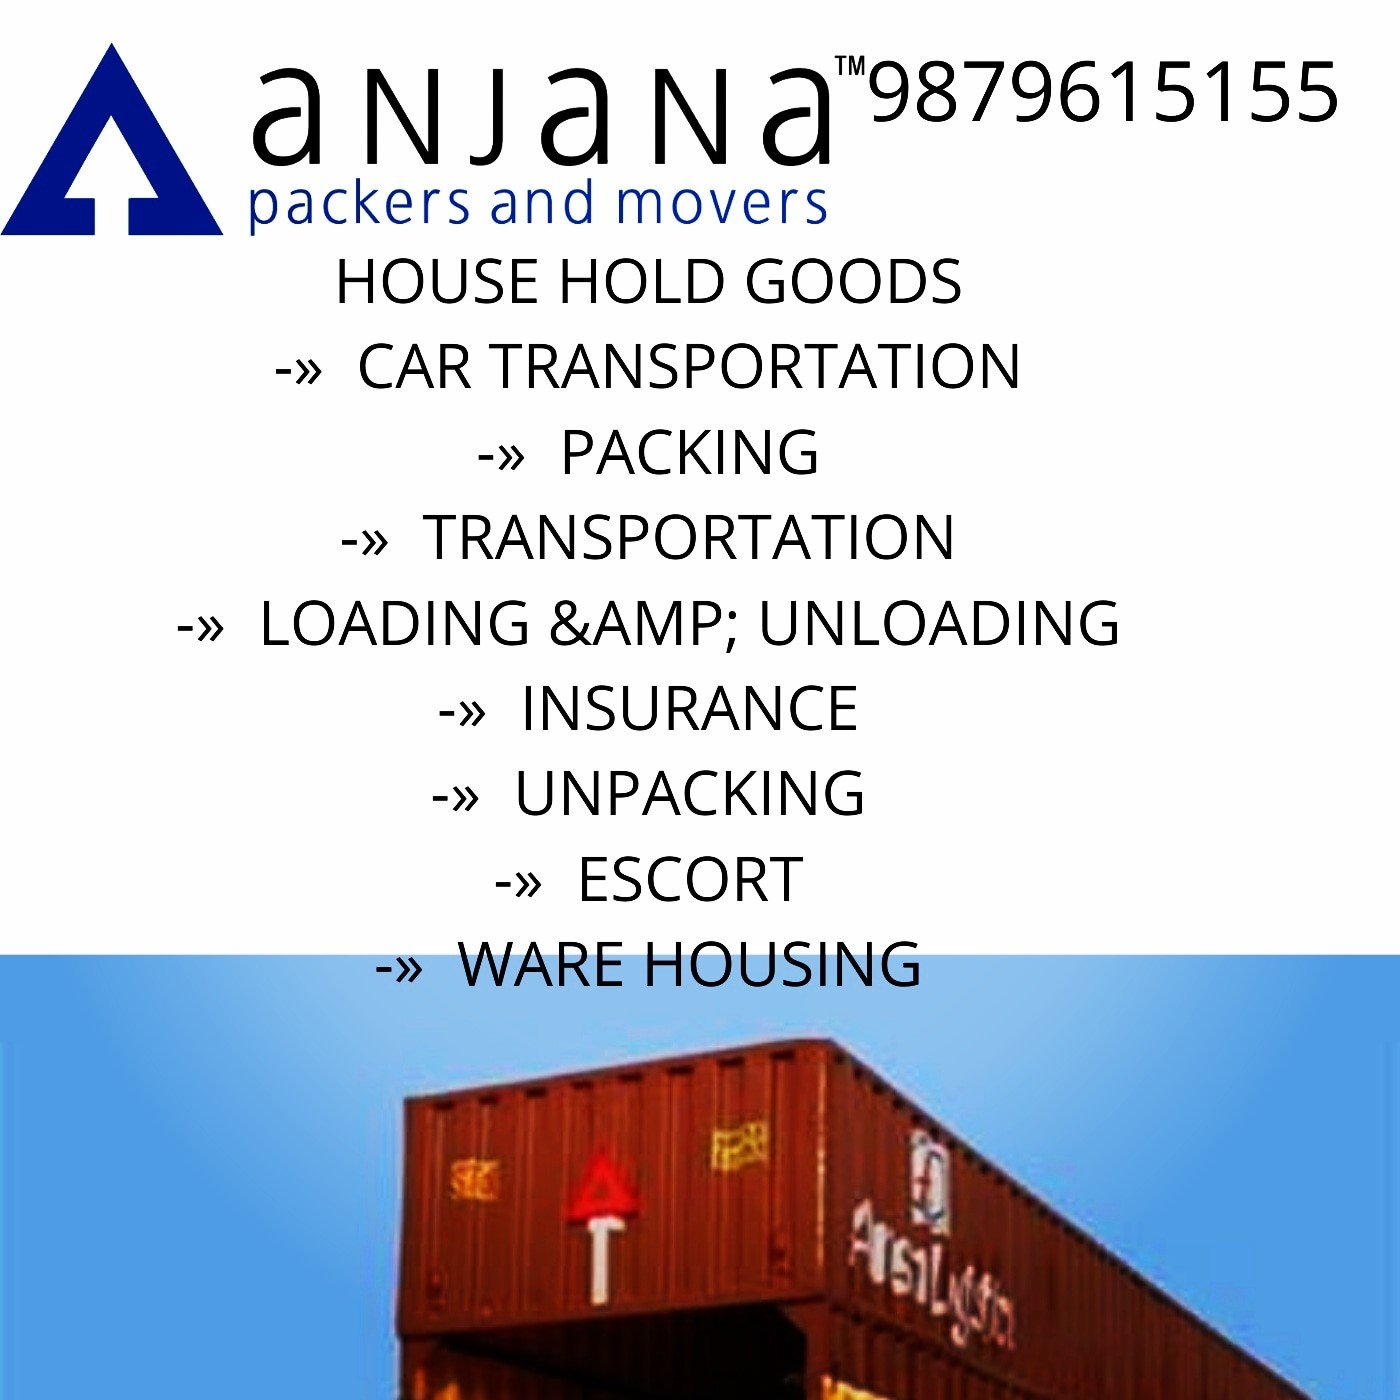 Anjana Packers and Movers